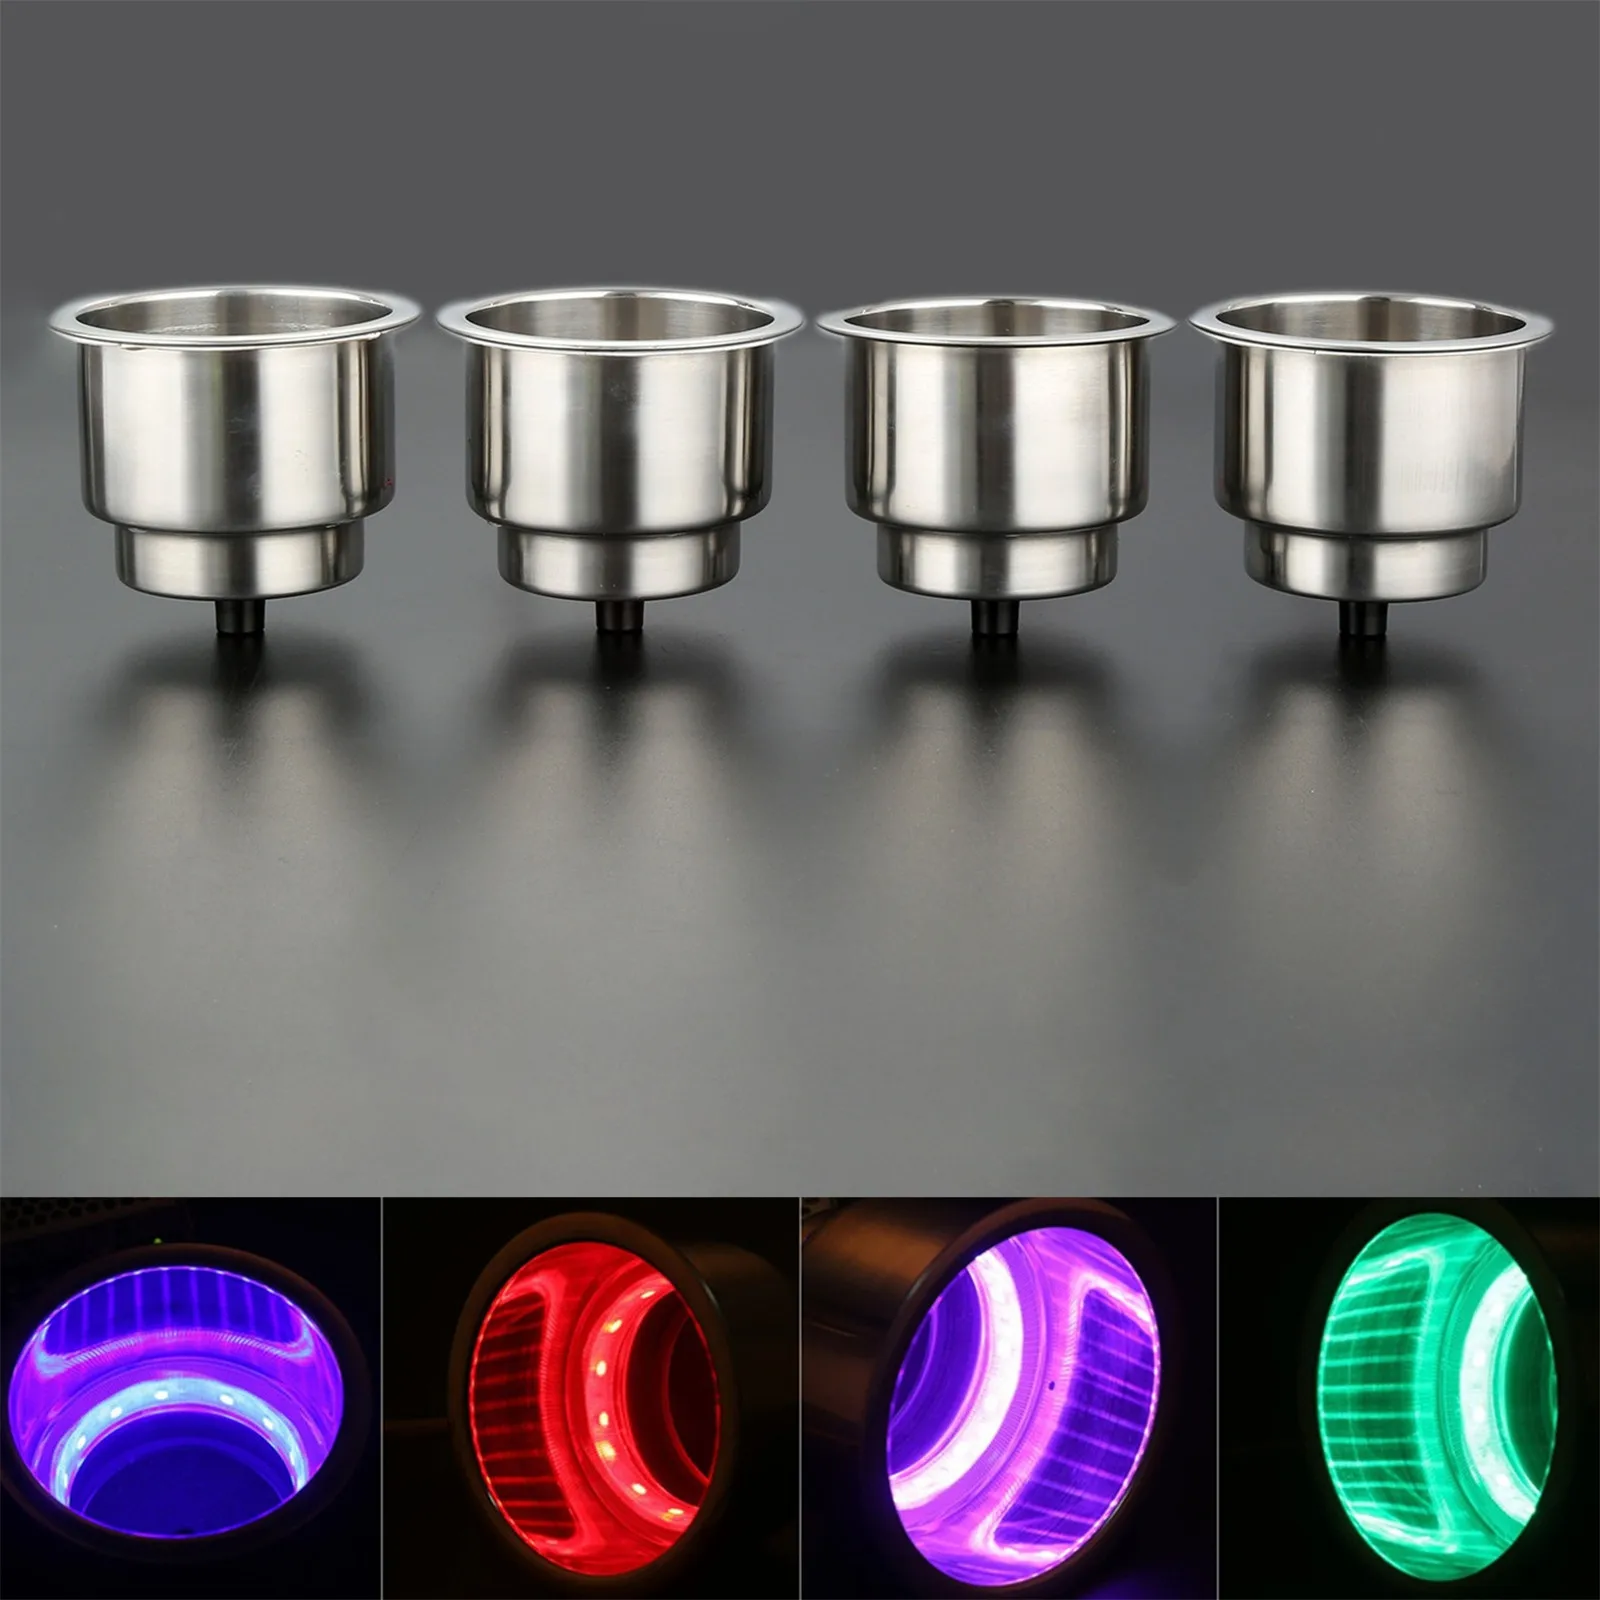 New Arrival 2PCS Green 8LED/'s 316 Stainless Steel Marine Boat Cup Drink Holder